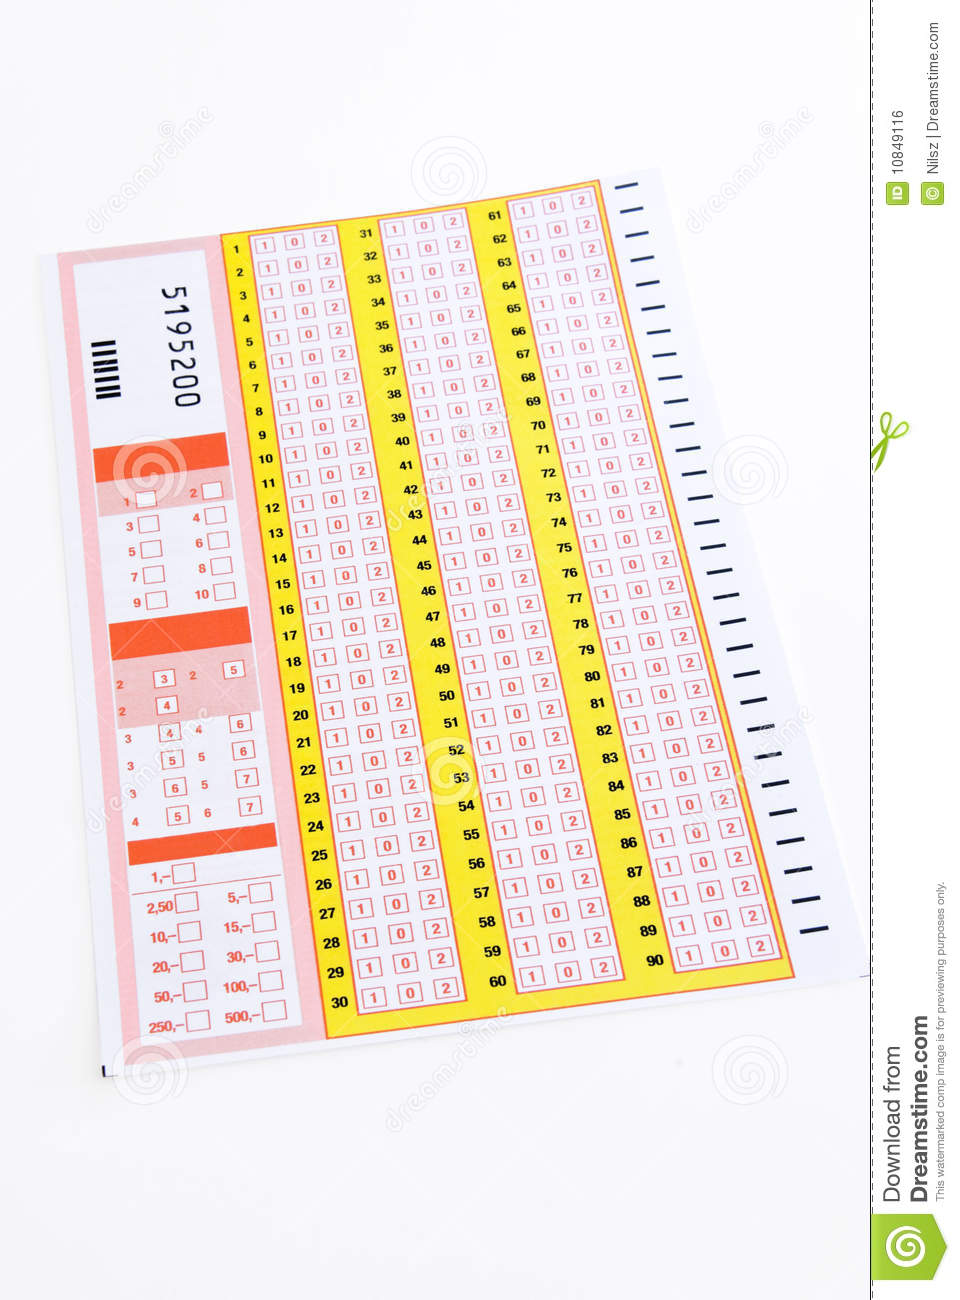 Blank Lottery Ticket Royalty Free Stock Image   Image  10849116